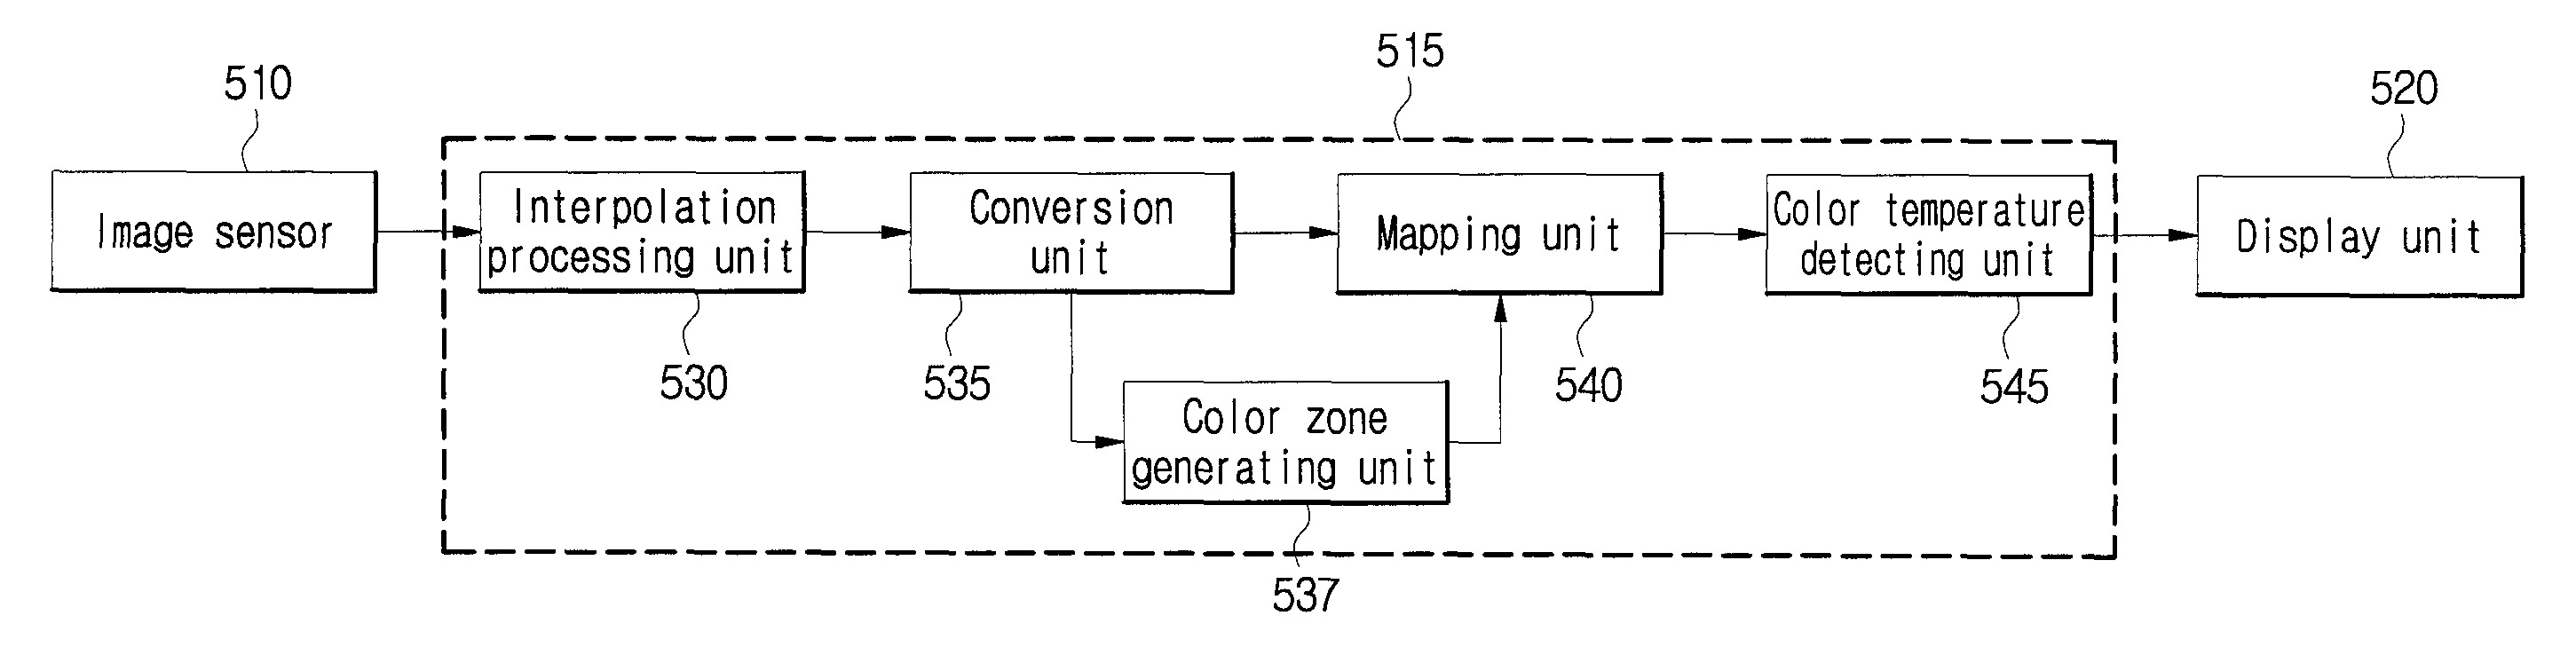 Method and device for detecting color temperature